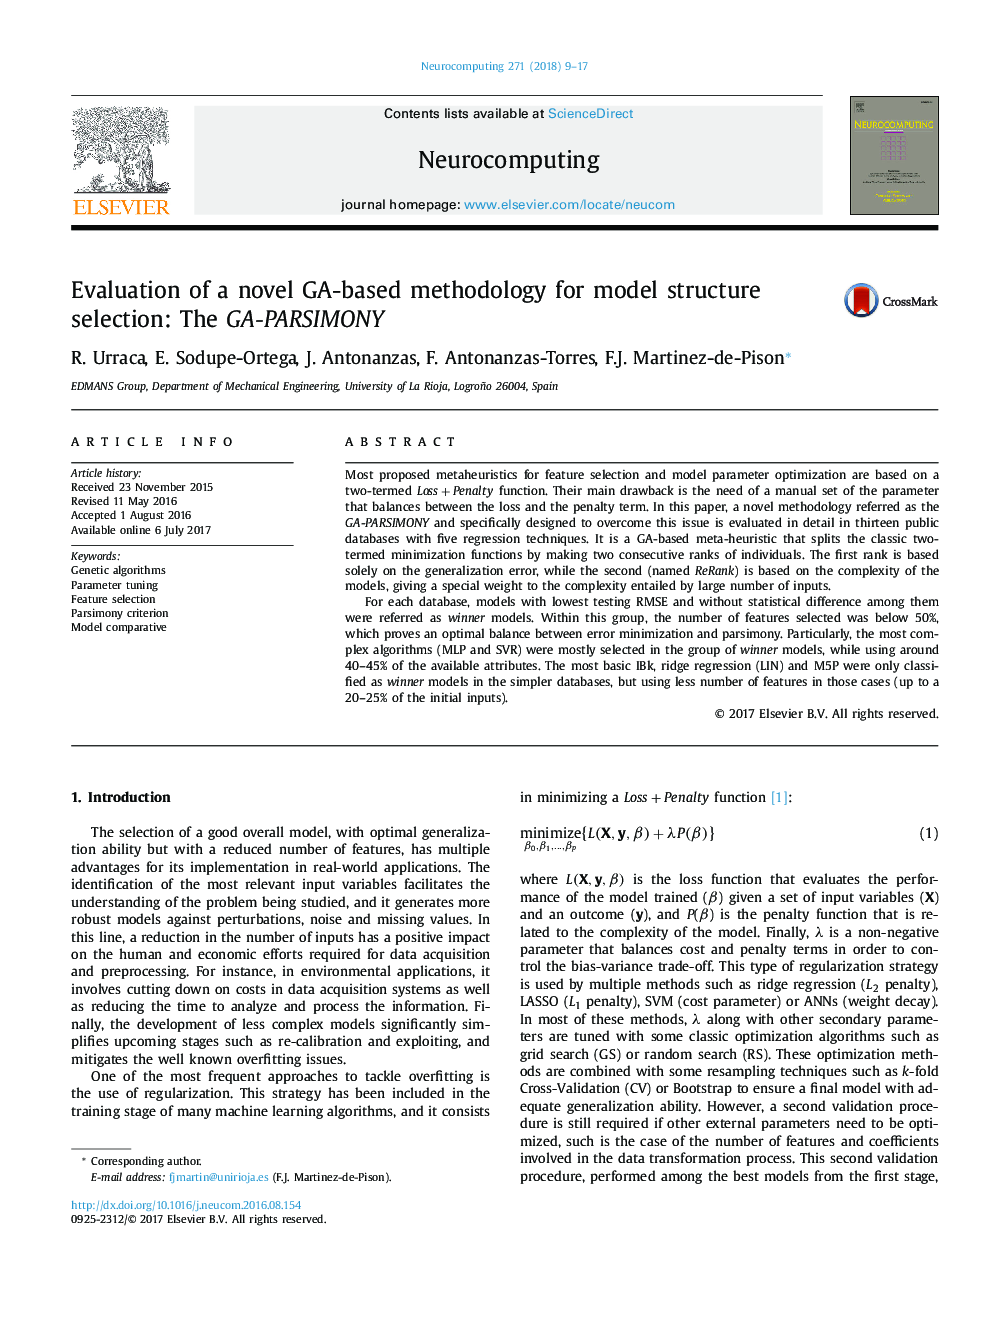 Evaluation of a novel GA-based methodology for model structure selection: The GA-PARSIMONY